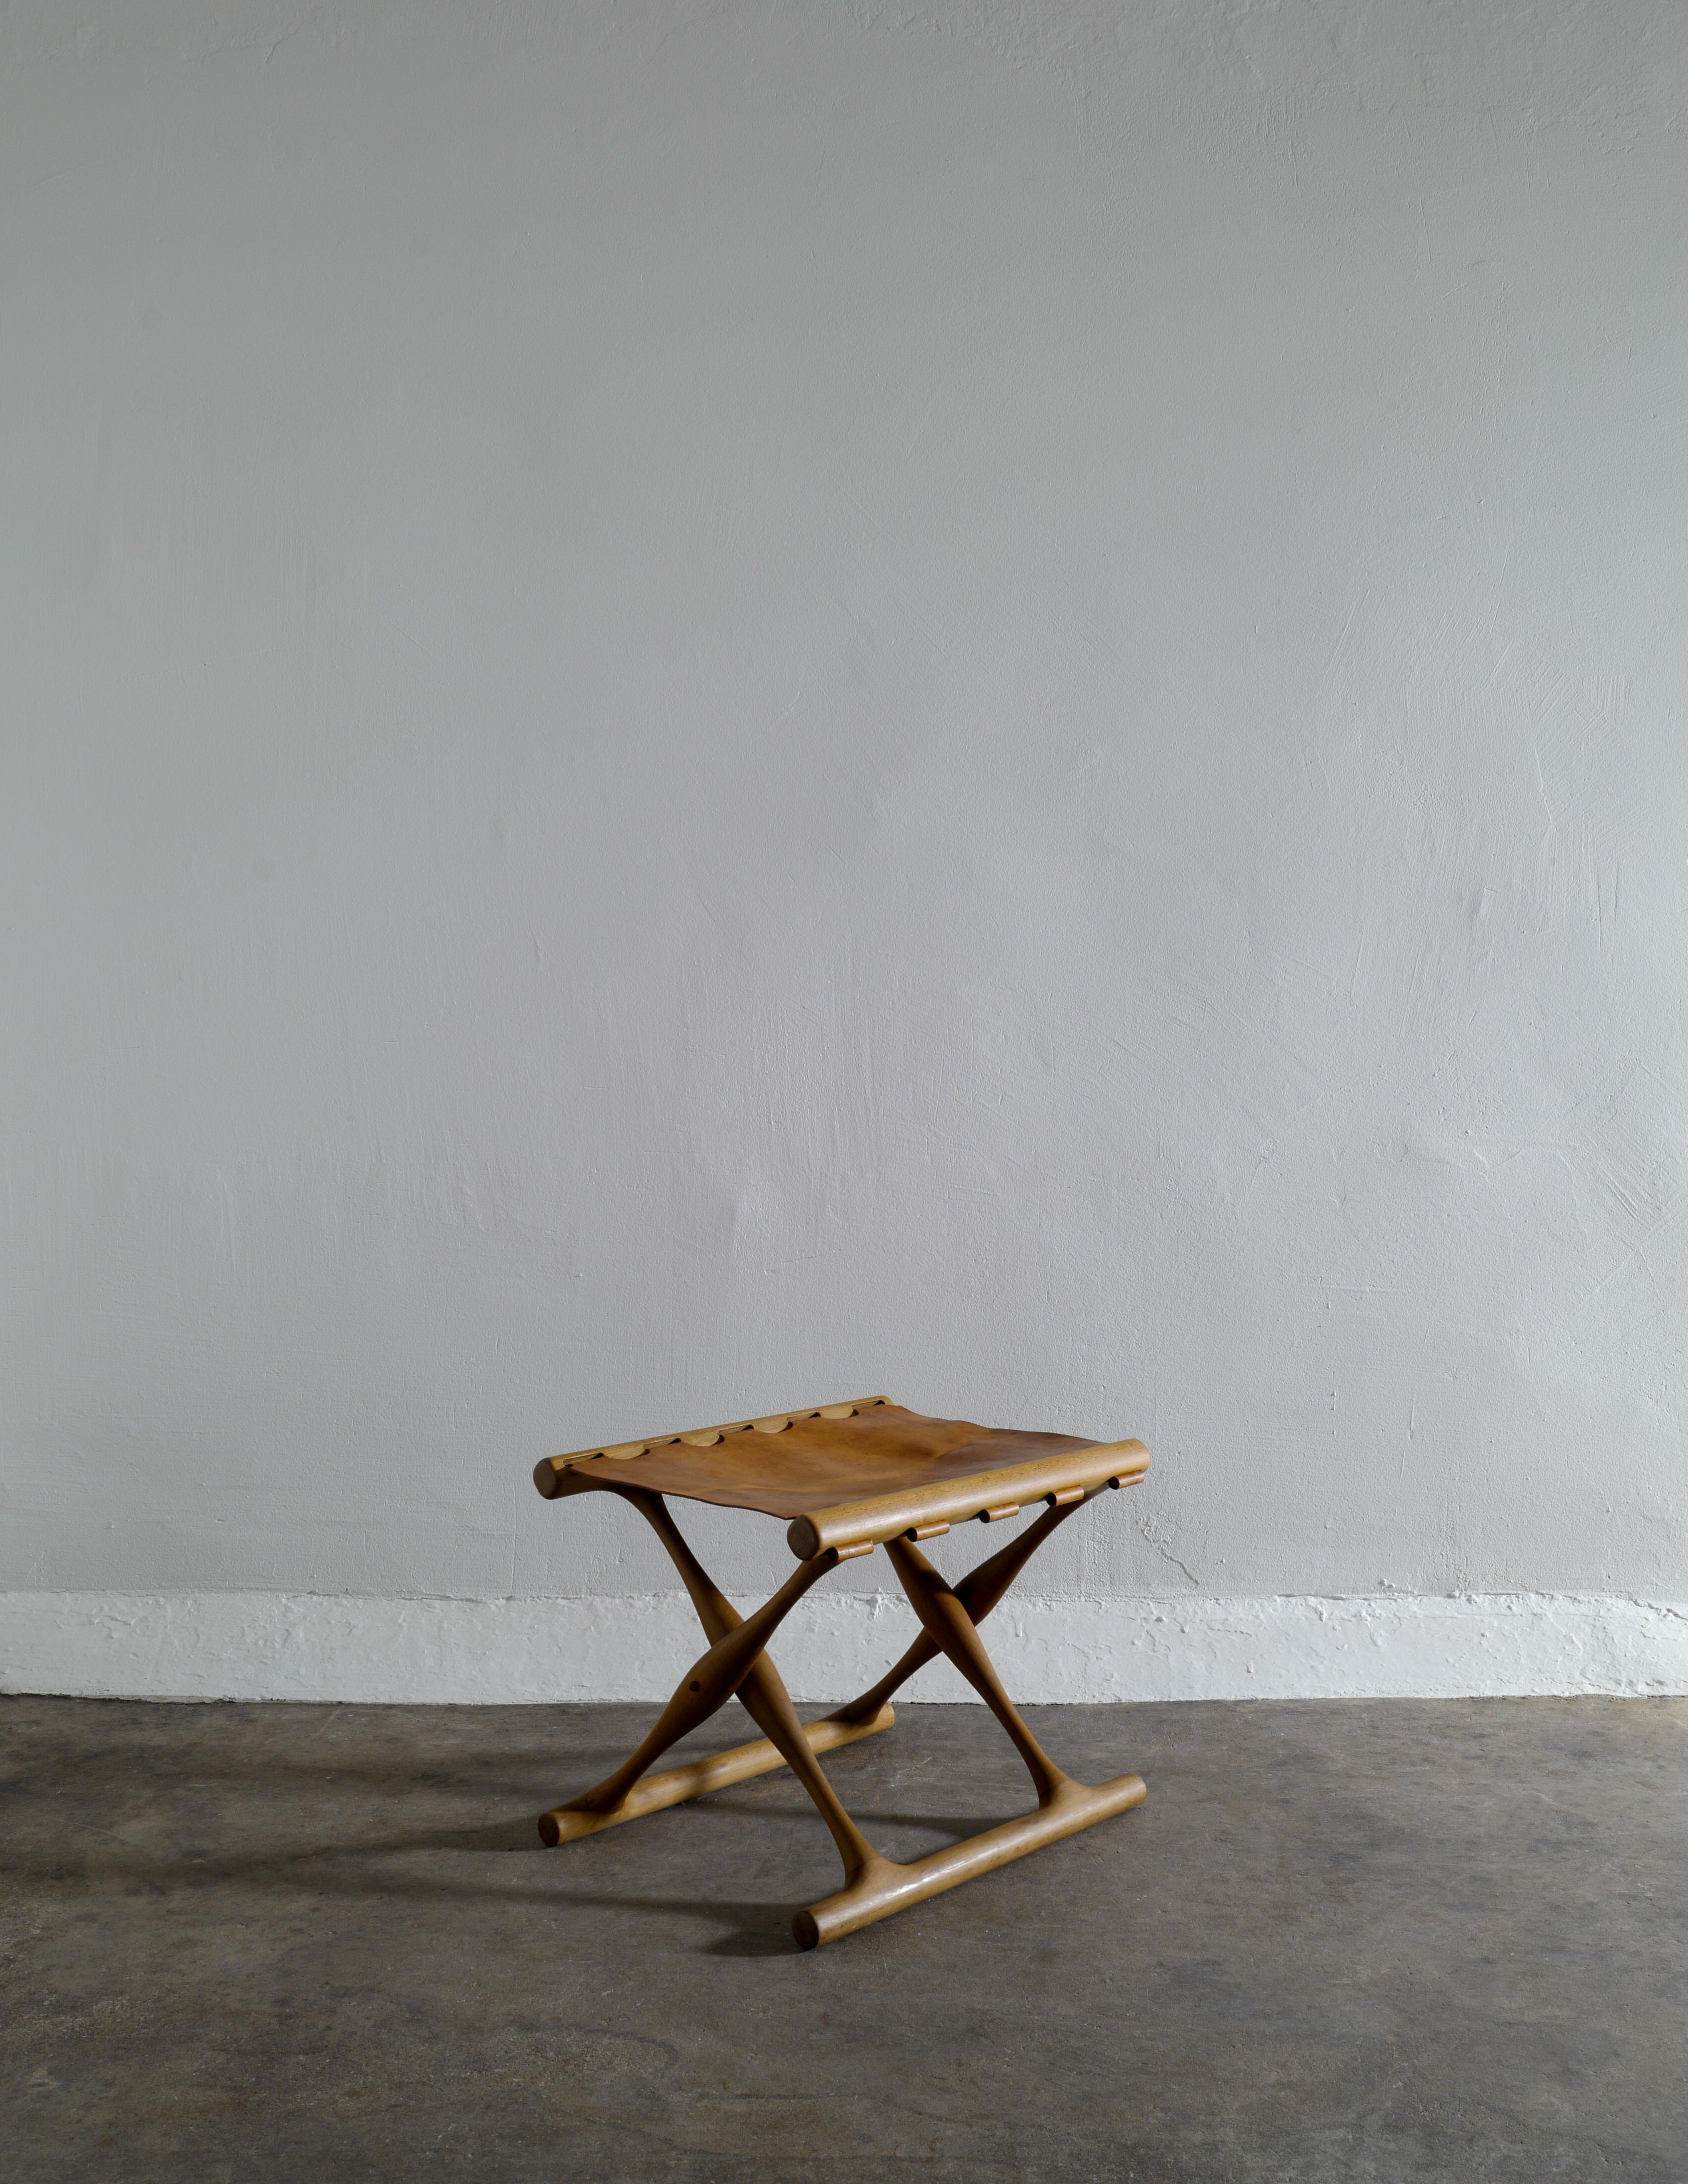 Rare and great example of Poul Hundevad's iconic “Guldhøj” folding stool in beech and leather. In good and original vintage condition showing some signs from age and use. The original sticker is still attached under neath the leather seating.